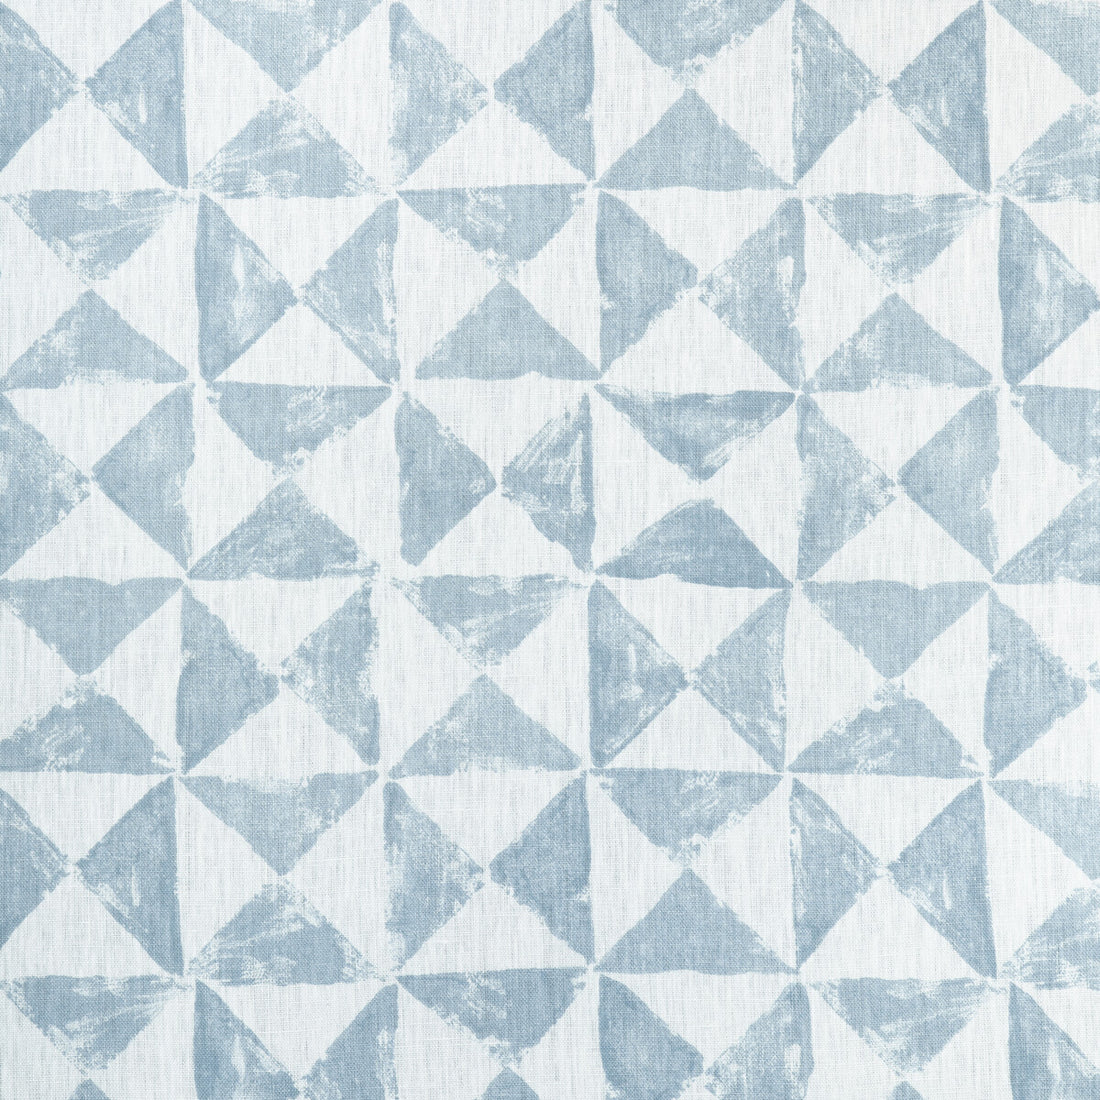 Triquad fabric in chambray color - pattern TRIQUAD.15.0 - by Kravet Basics in the Small Scale Prints collection